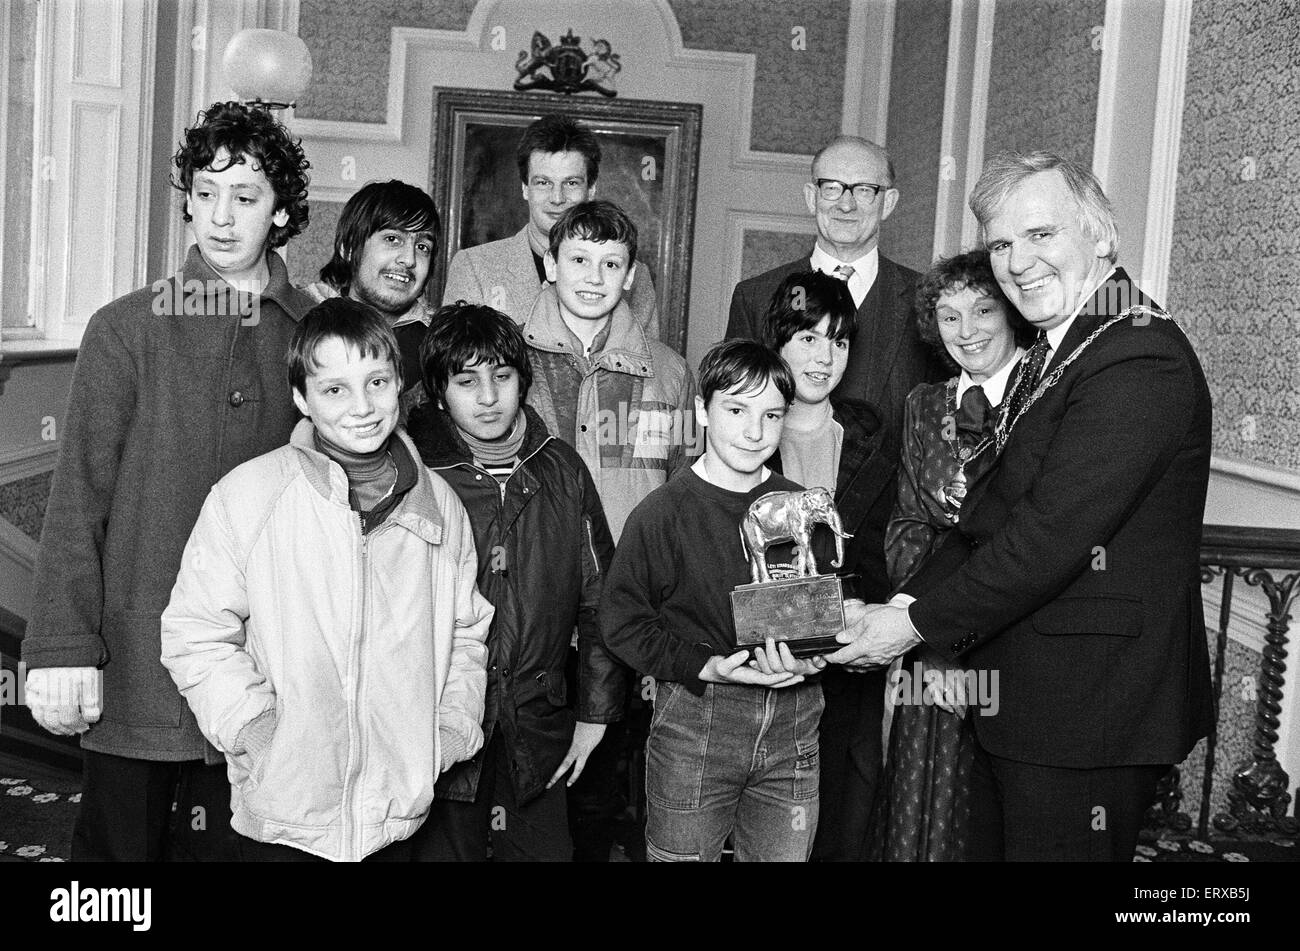 Kirklees Mayor and Mayoress Councillor and Mrs Colin Walker give a tour of the town hall to pupils from Longley School. 8th January 1986. Stock Photo